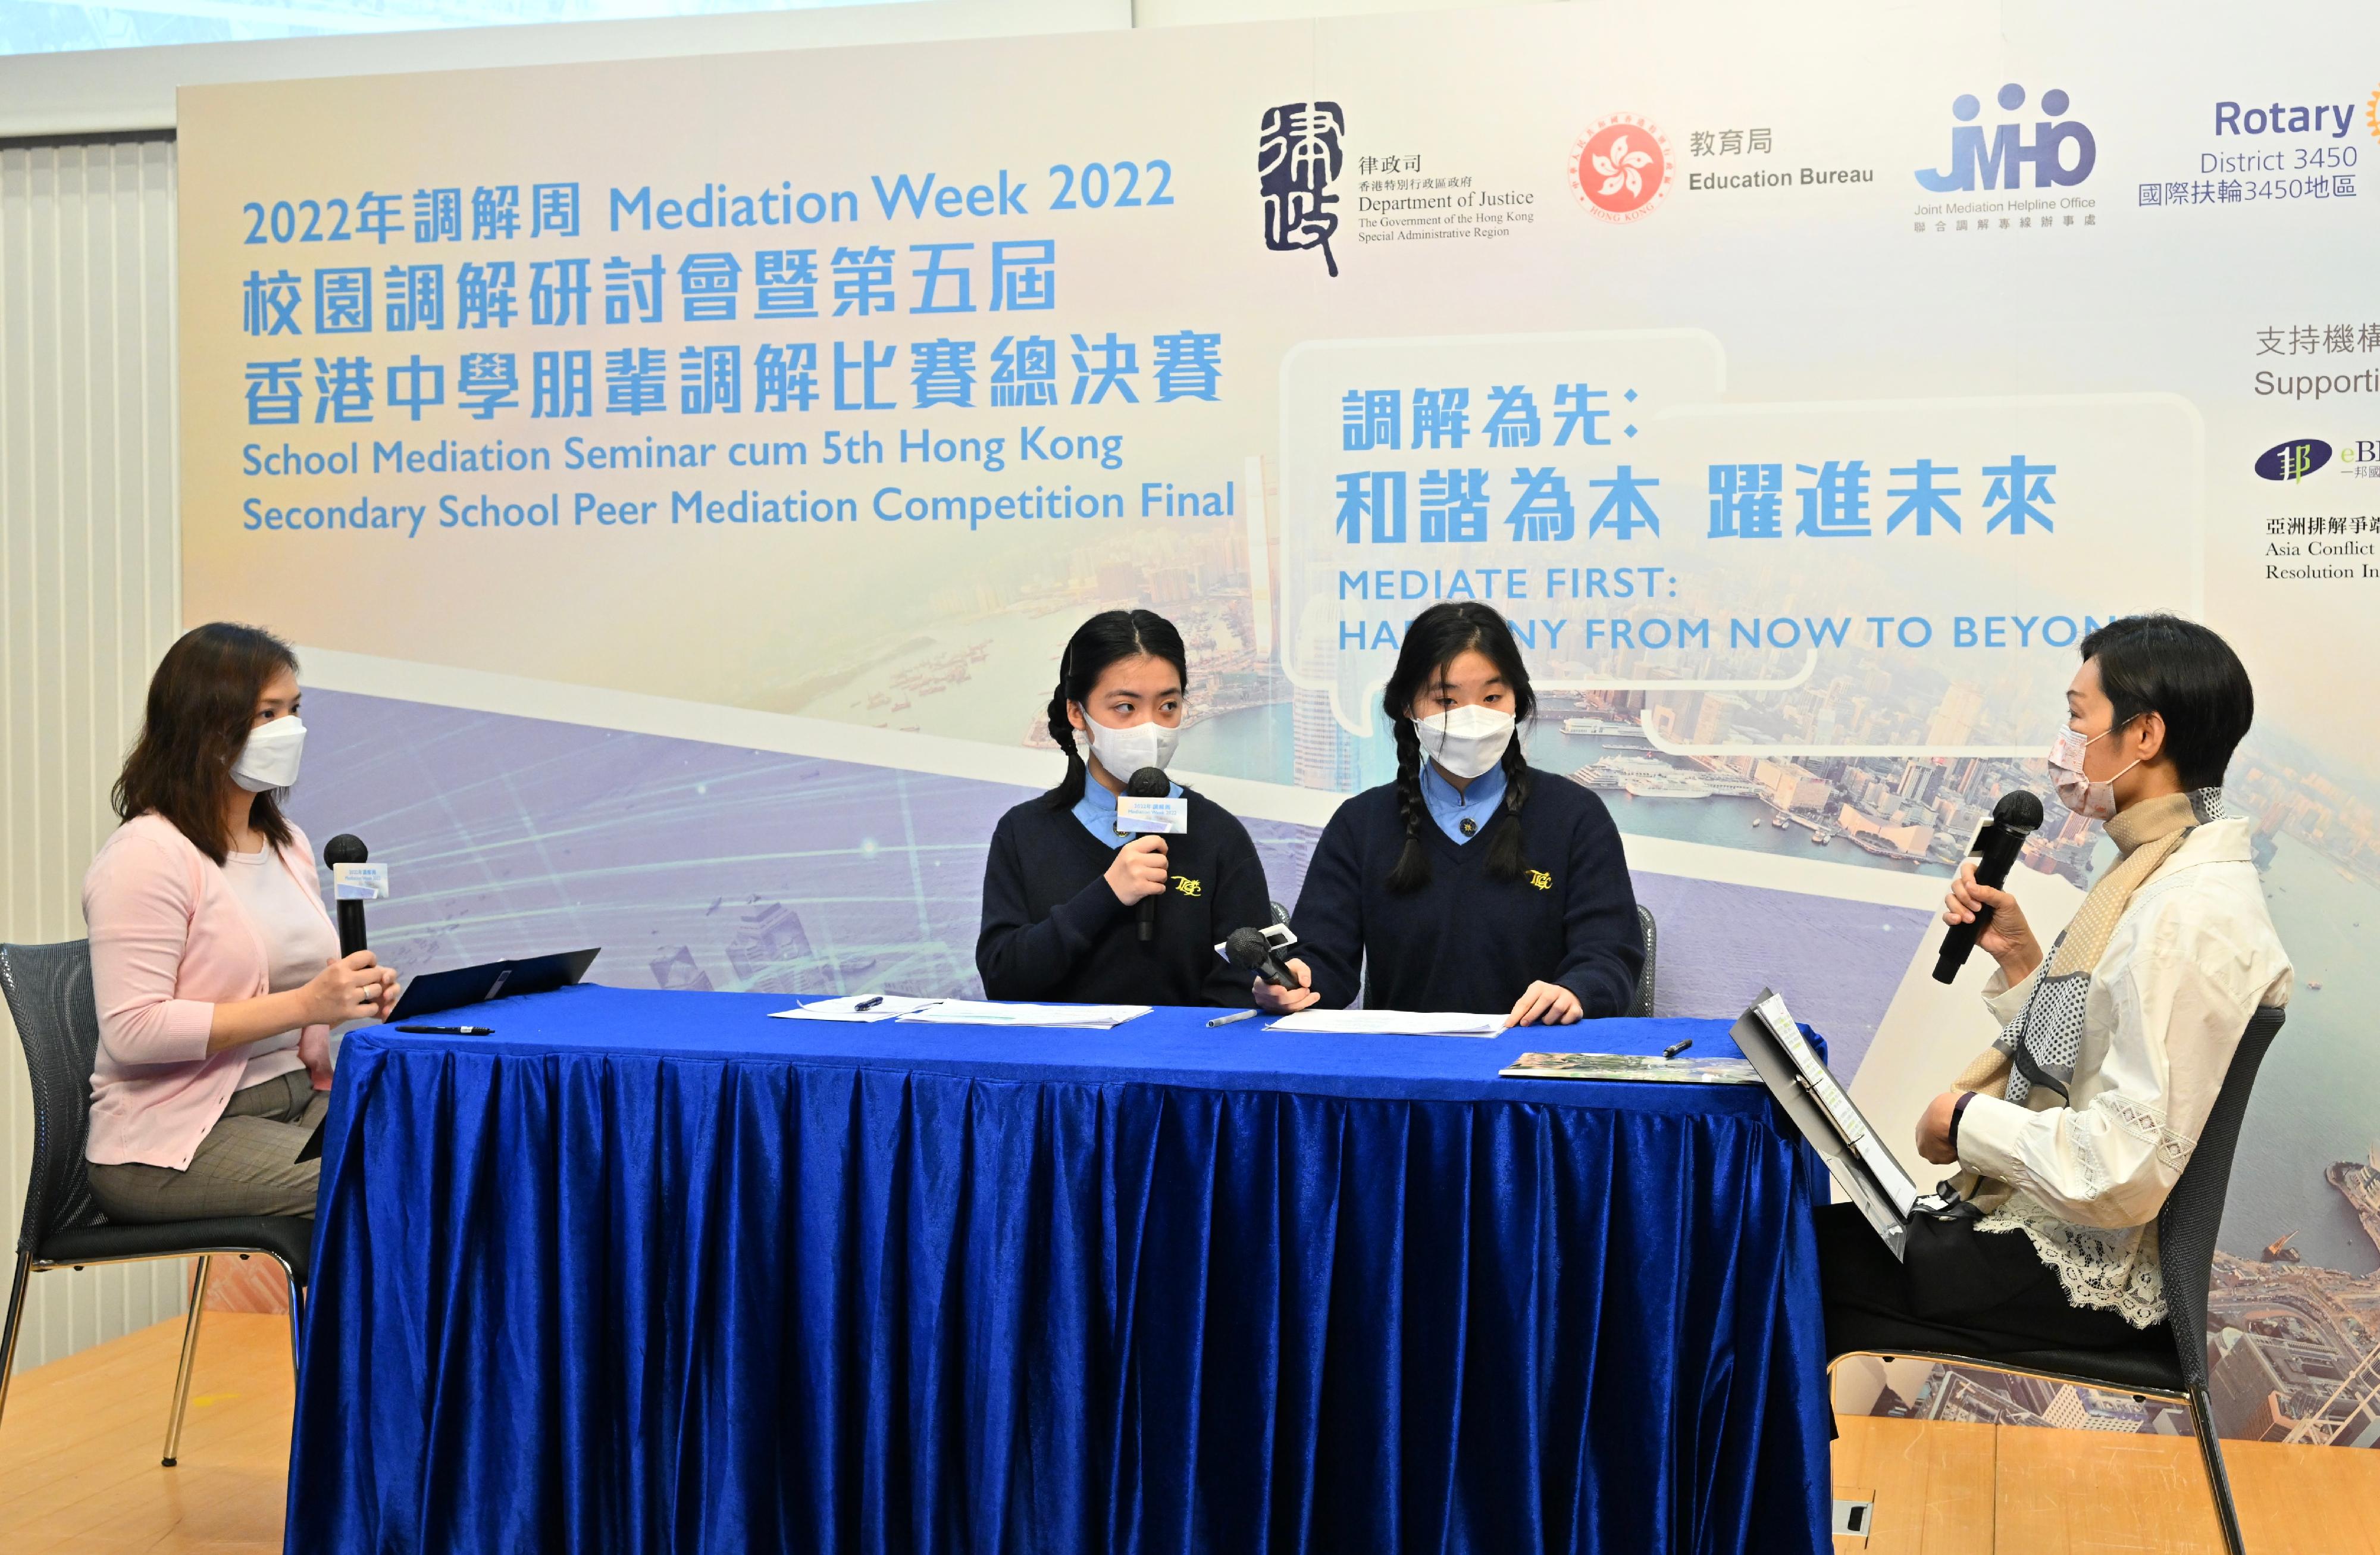 The Mediation Week 2022 organised by the Department of Justice (DoJ) was officially launched today (May 2). Picture shows representatives of True Light Girls' College taking part in the 5th Hong Kong Secondary School Peer Mediation Competition Final.